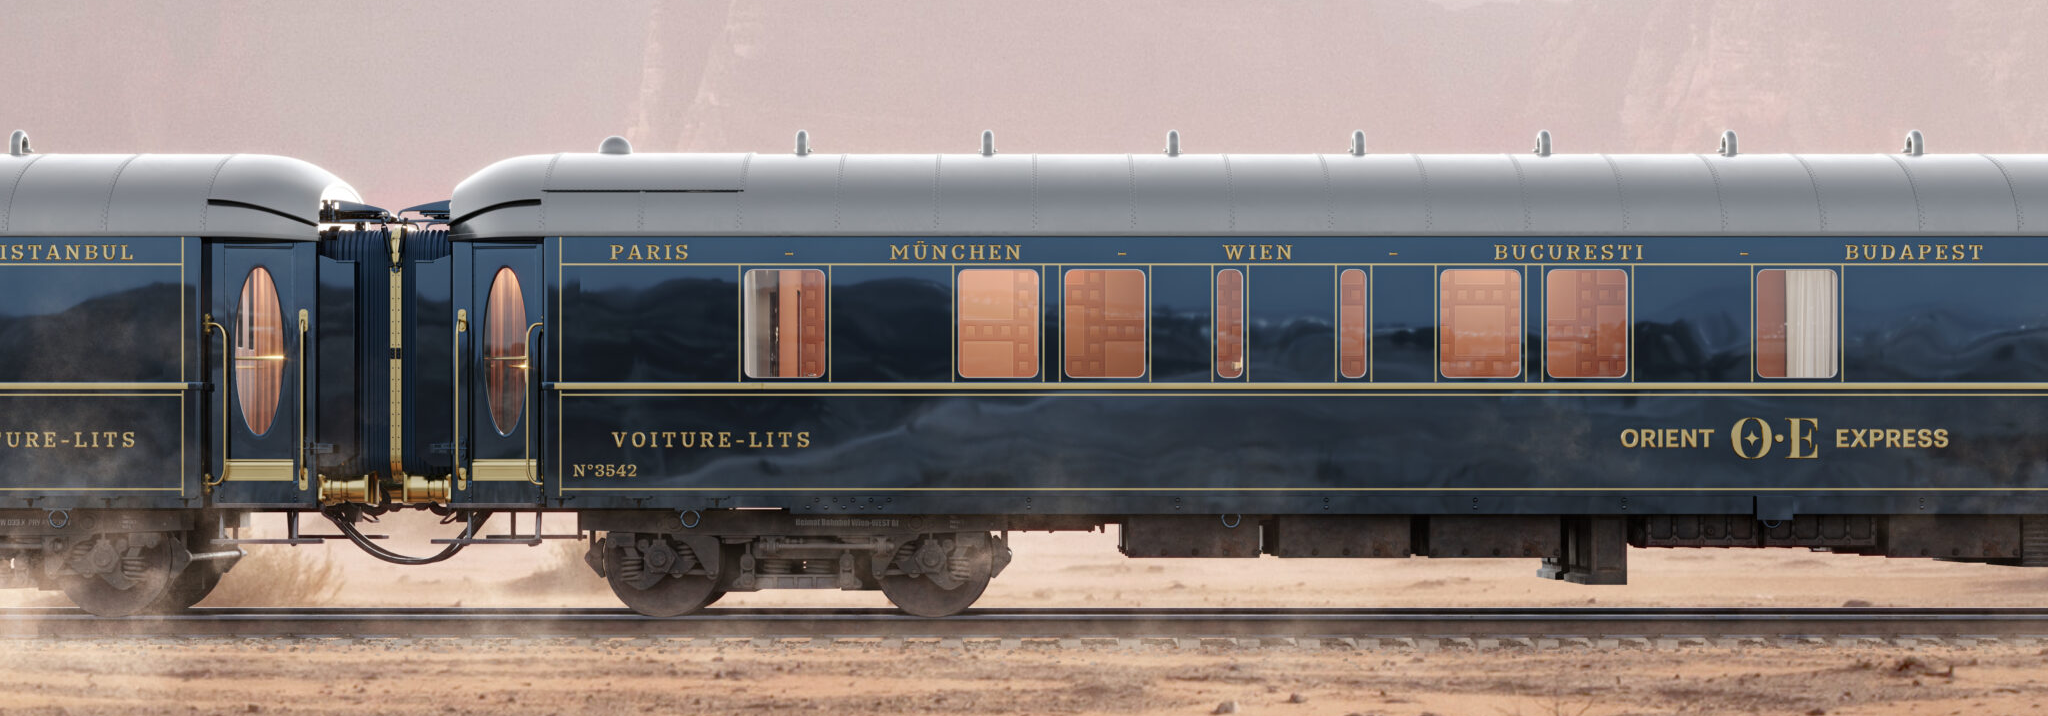 Travel PR News  Accor unveils first images of the future Orient Express  train